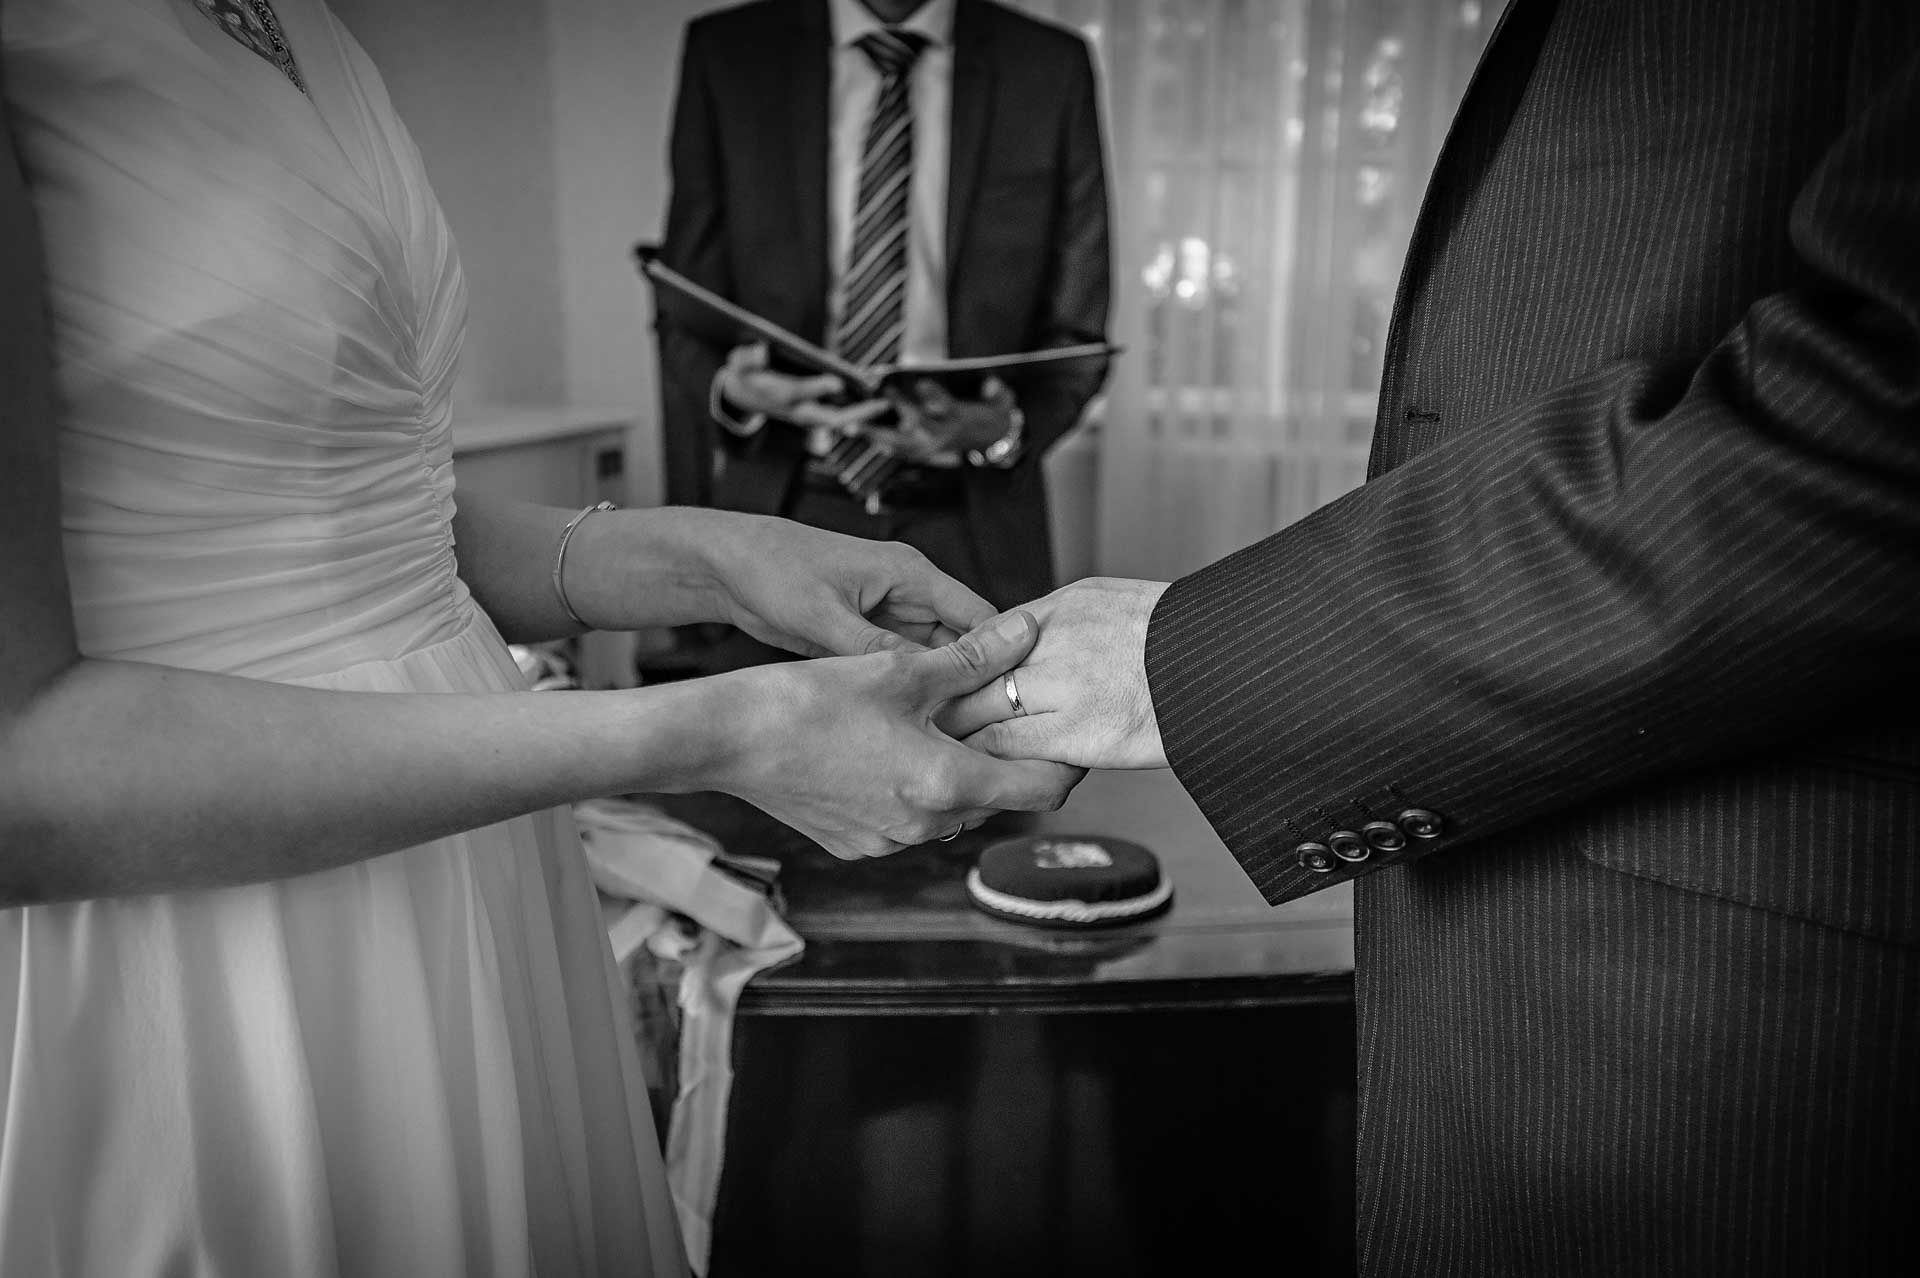 Kensington and Chelsea Old Town Hall Wedding Photographer - Exchange of Wedding Rings - Black and White